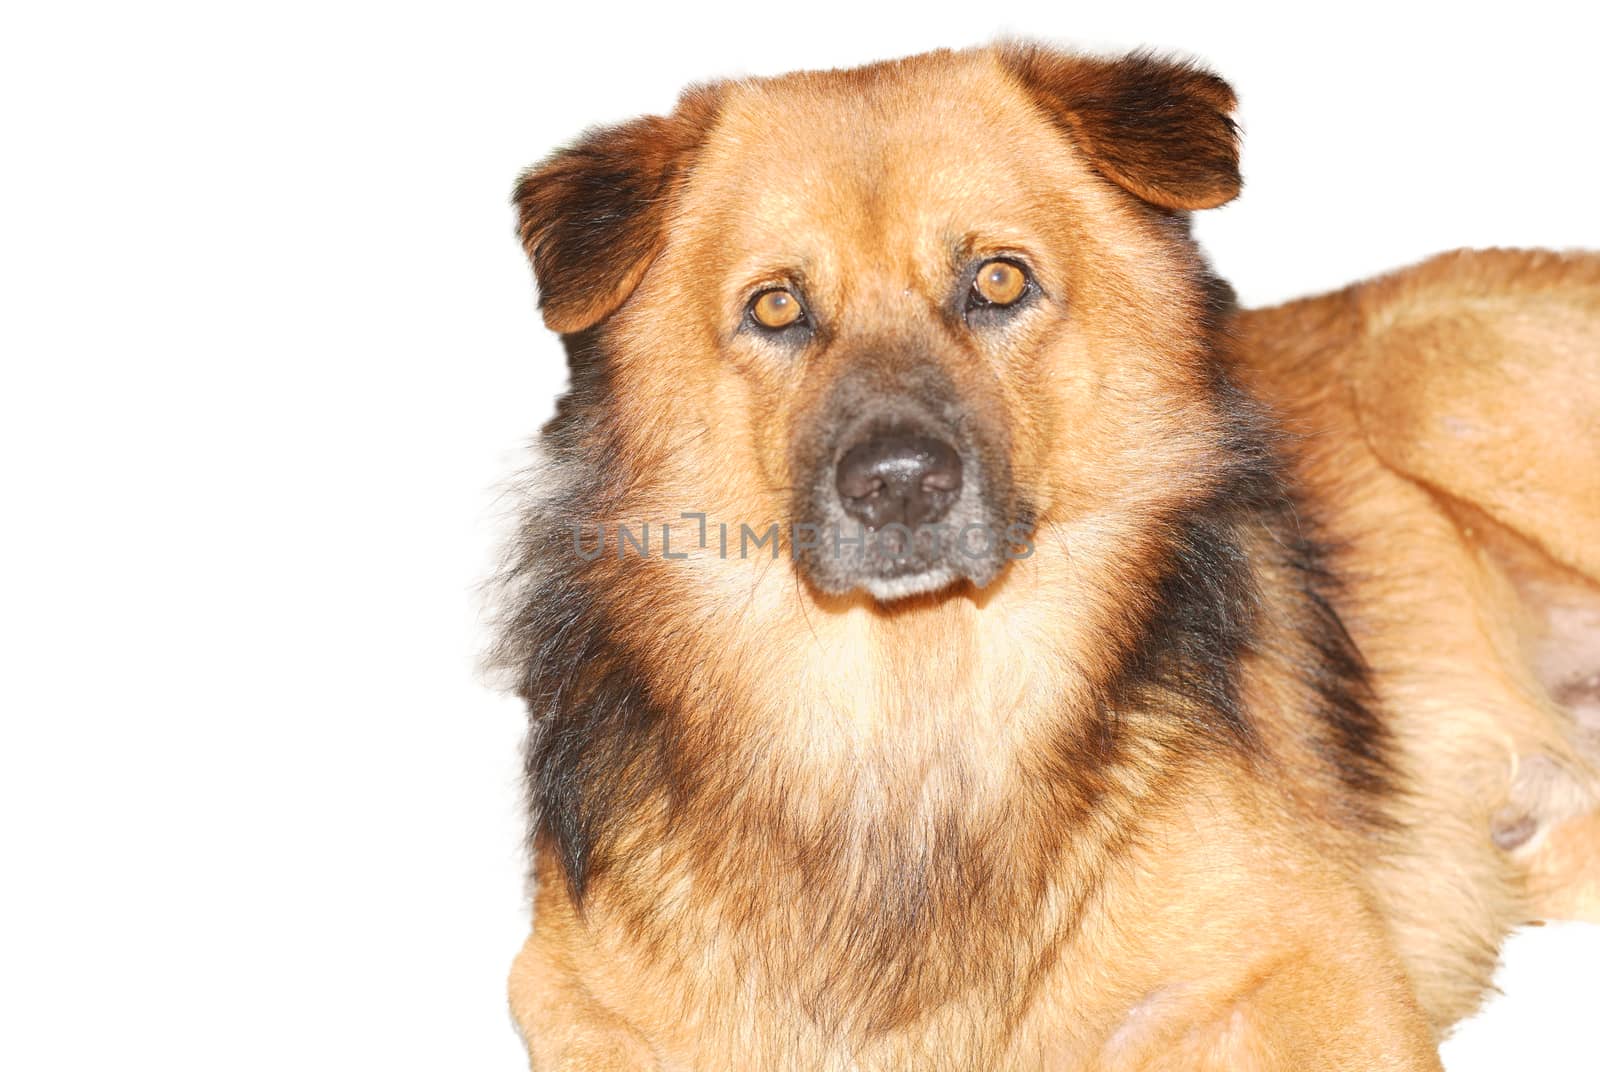 Brown shaggy dog looking at camera isolated white background by noppha80